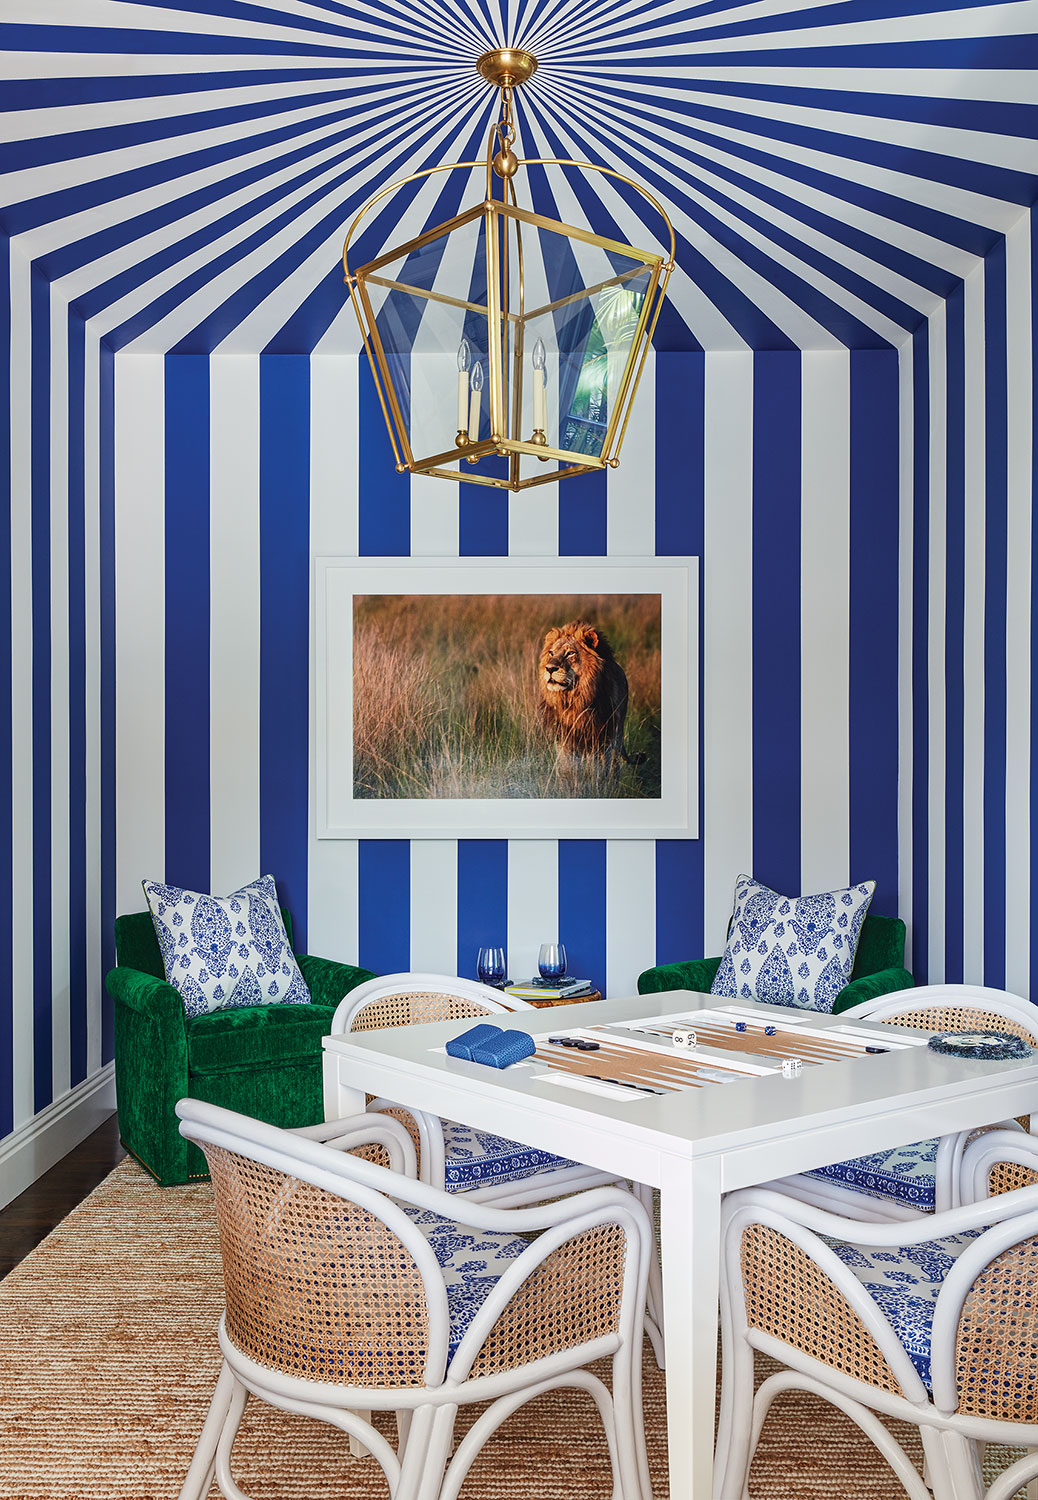 Blue and white striped tent effect in game room